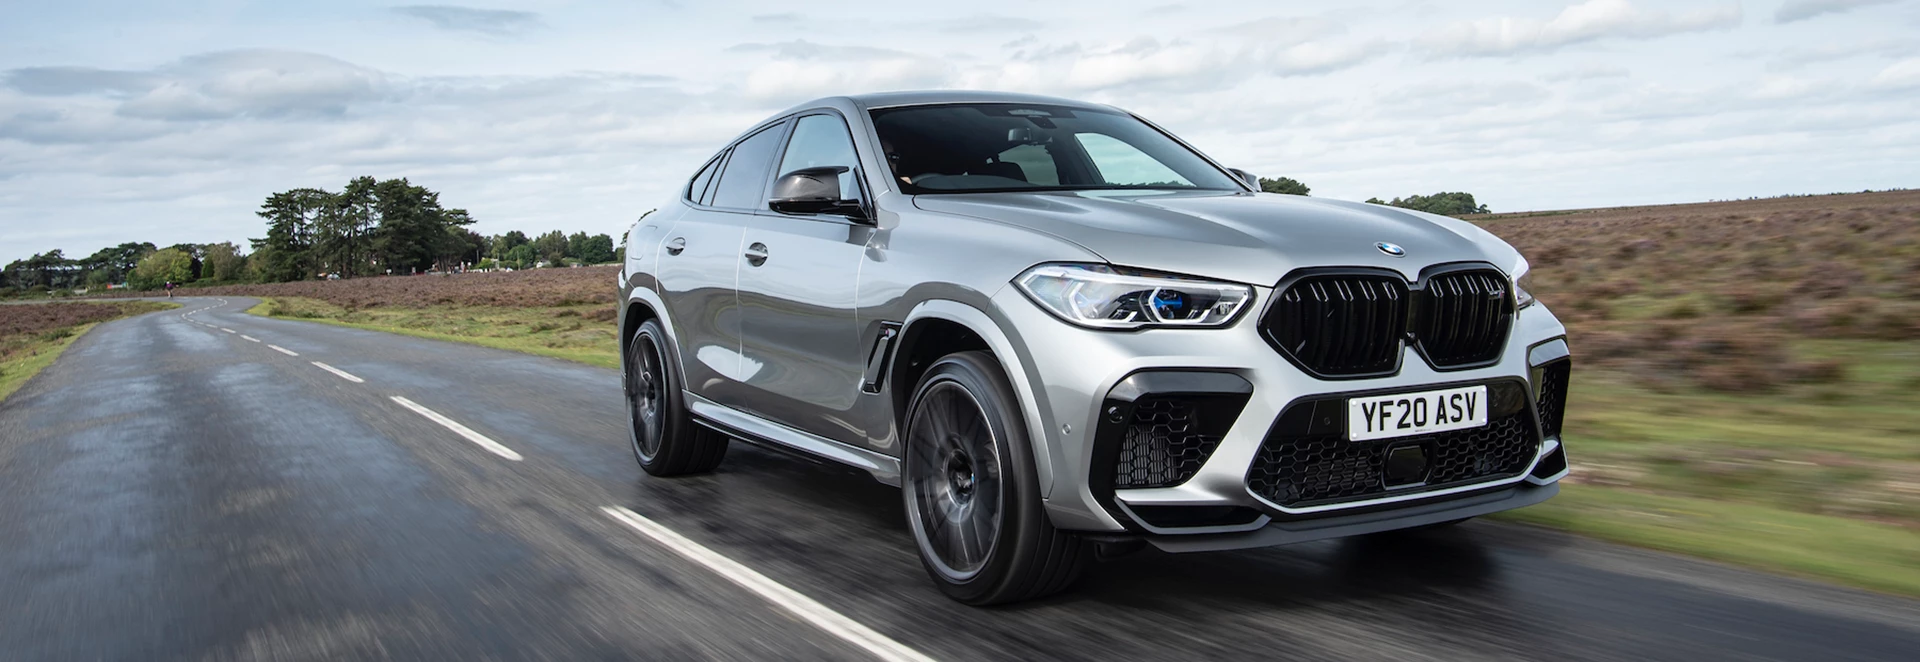 BMW readying new X8 as SUV flagship 